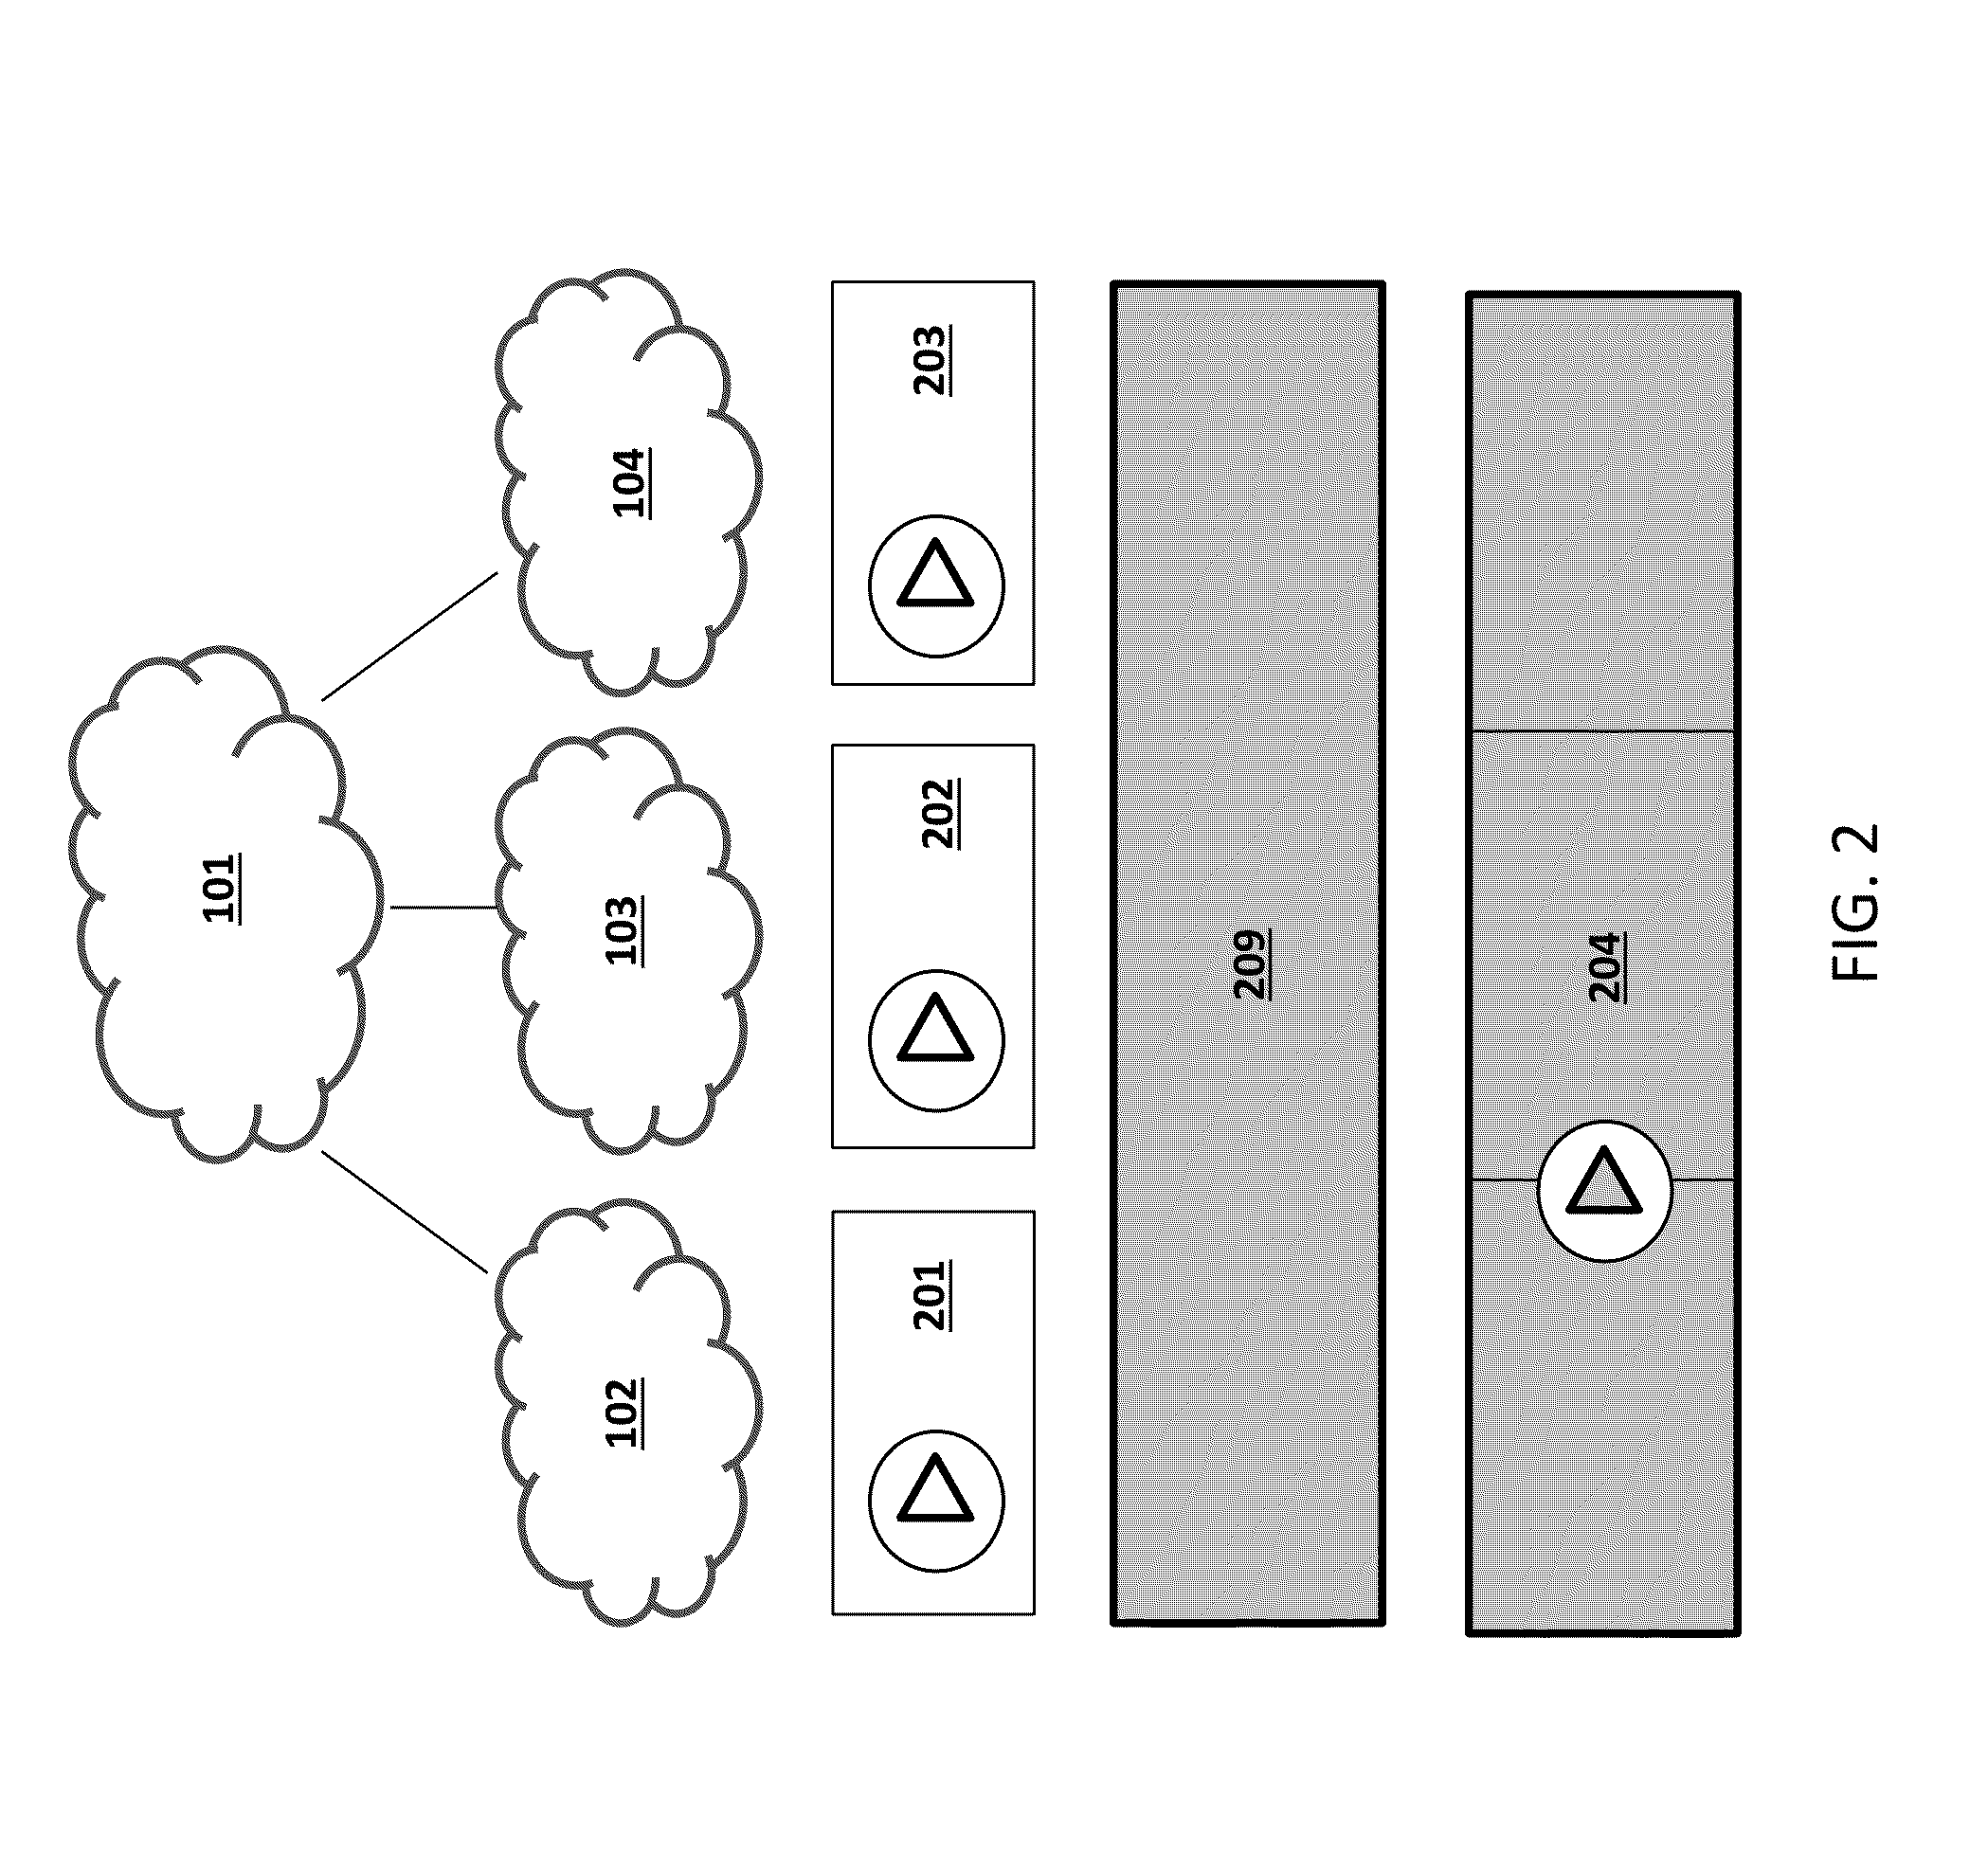 Method of Active-View Movie Technology for Creating and Playing Multi-Stream Video Files